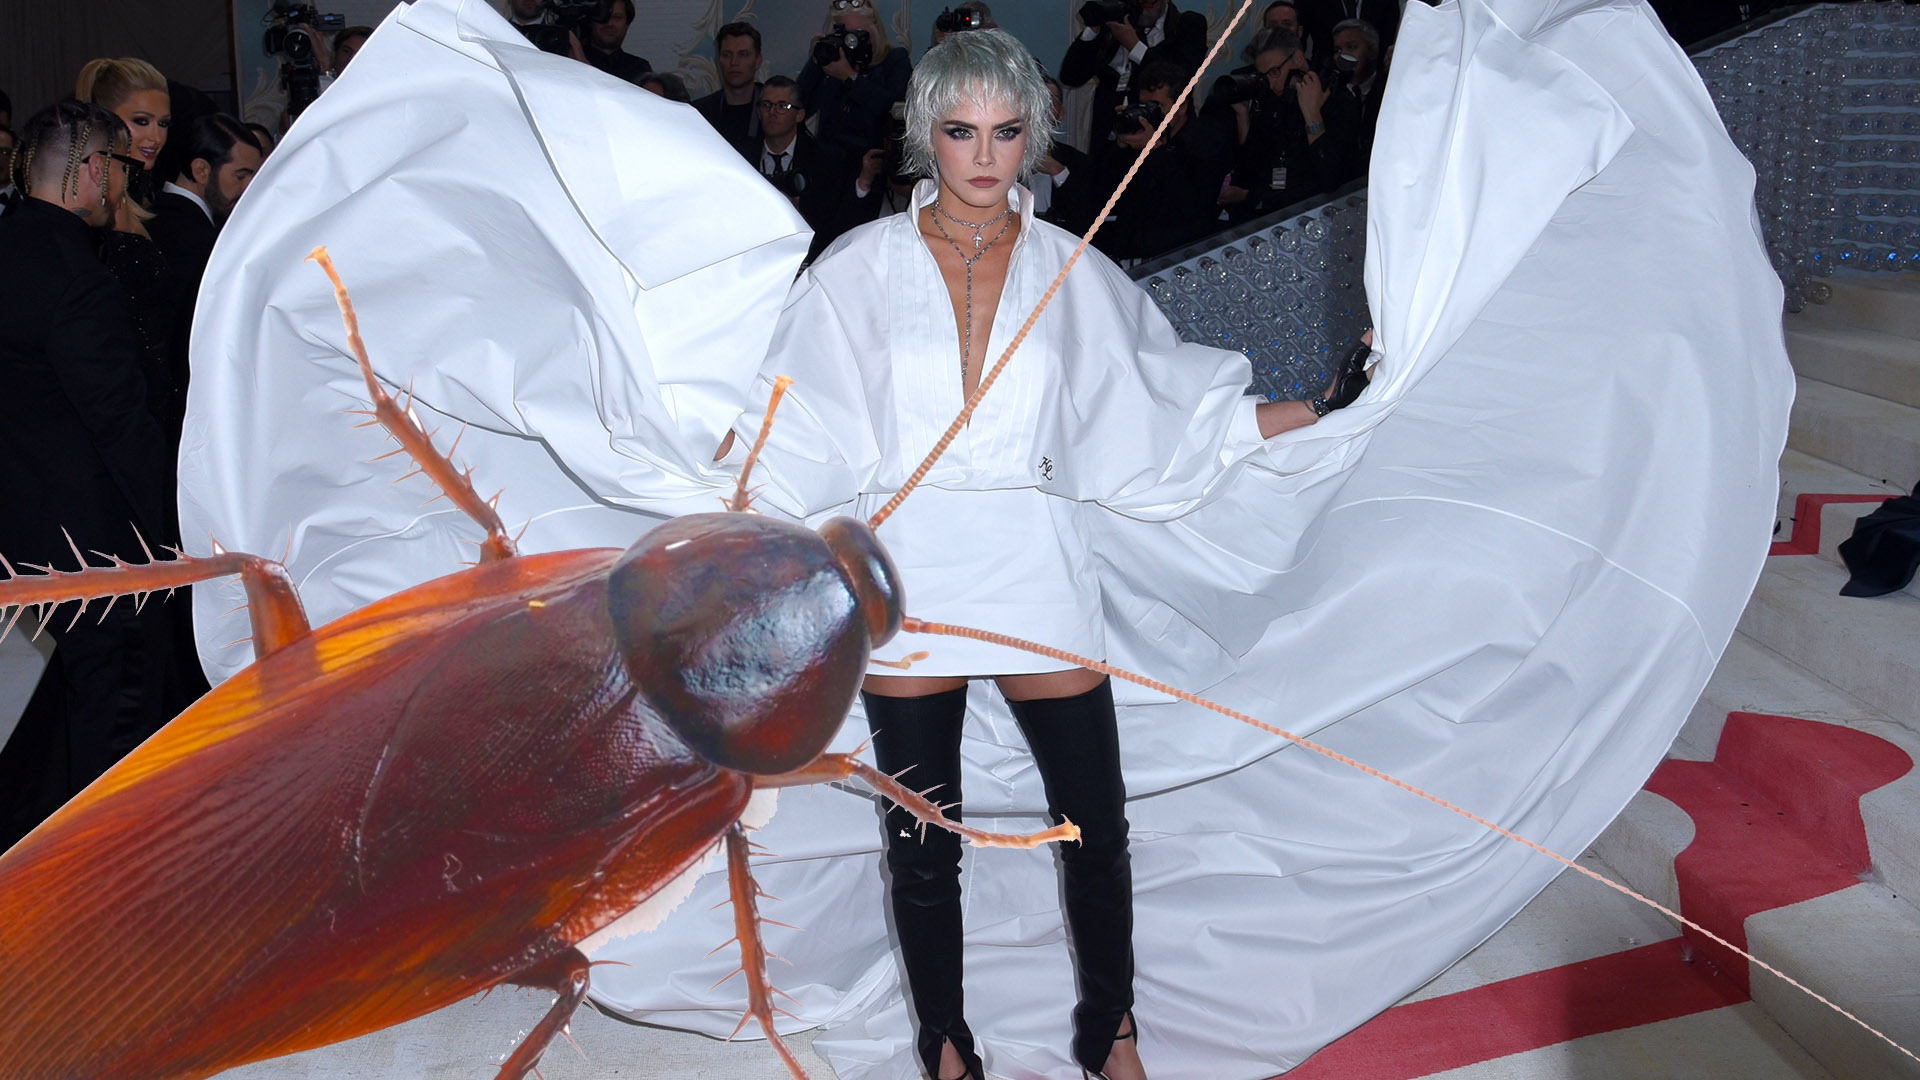 Met Gala 2023's Most Unforgettable Moment: A Cockroach on the Red Carpet